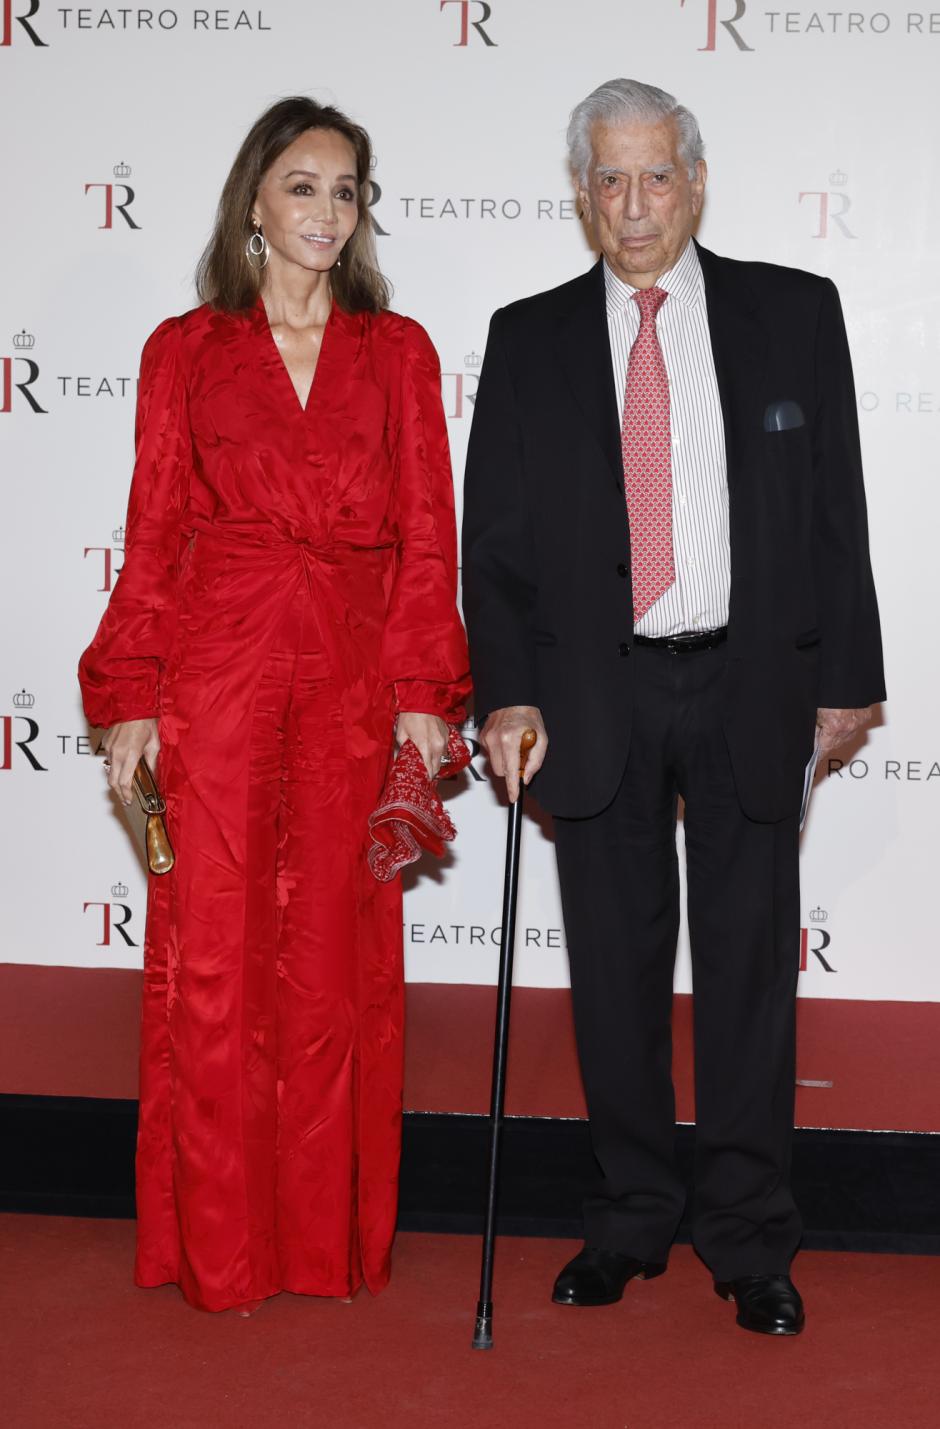 Isabel Preysler and Mario Vargas Llosa at photocall for Premiere Opera Aida in Madrid on Monday, 24 October 2022.